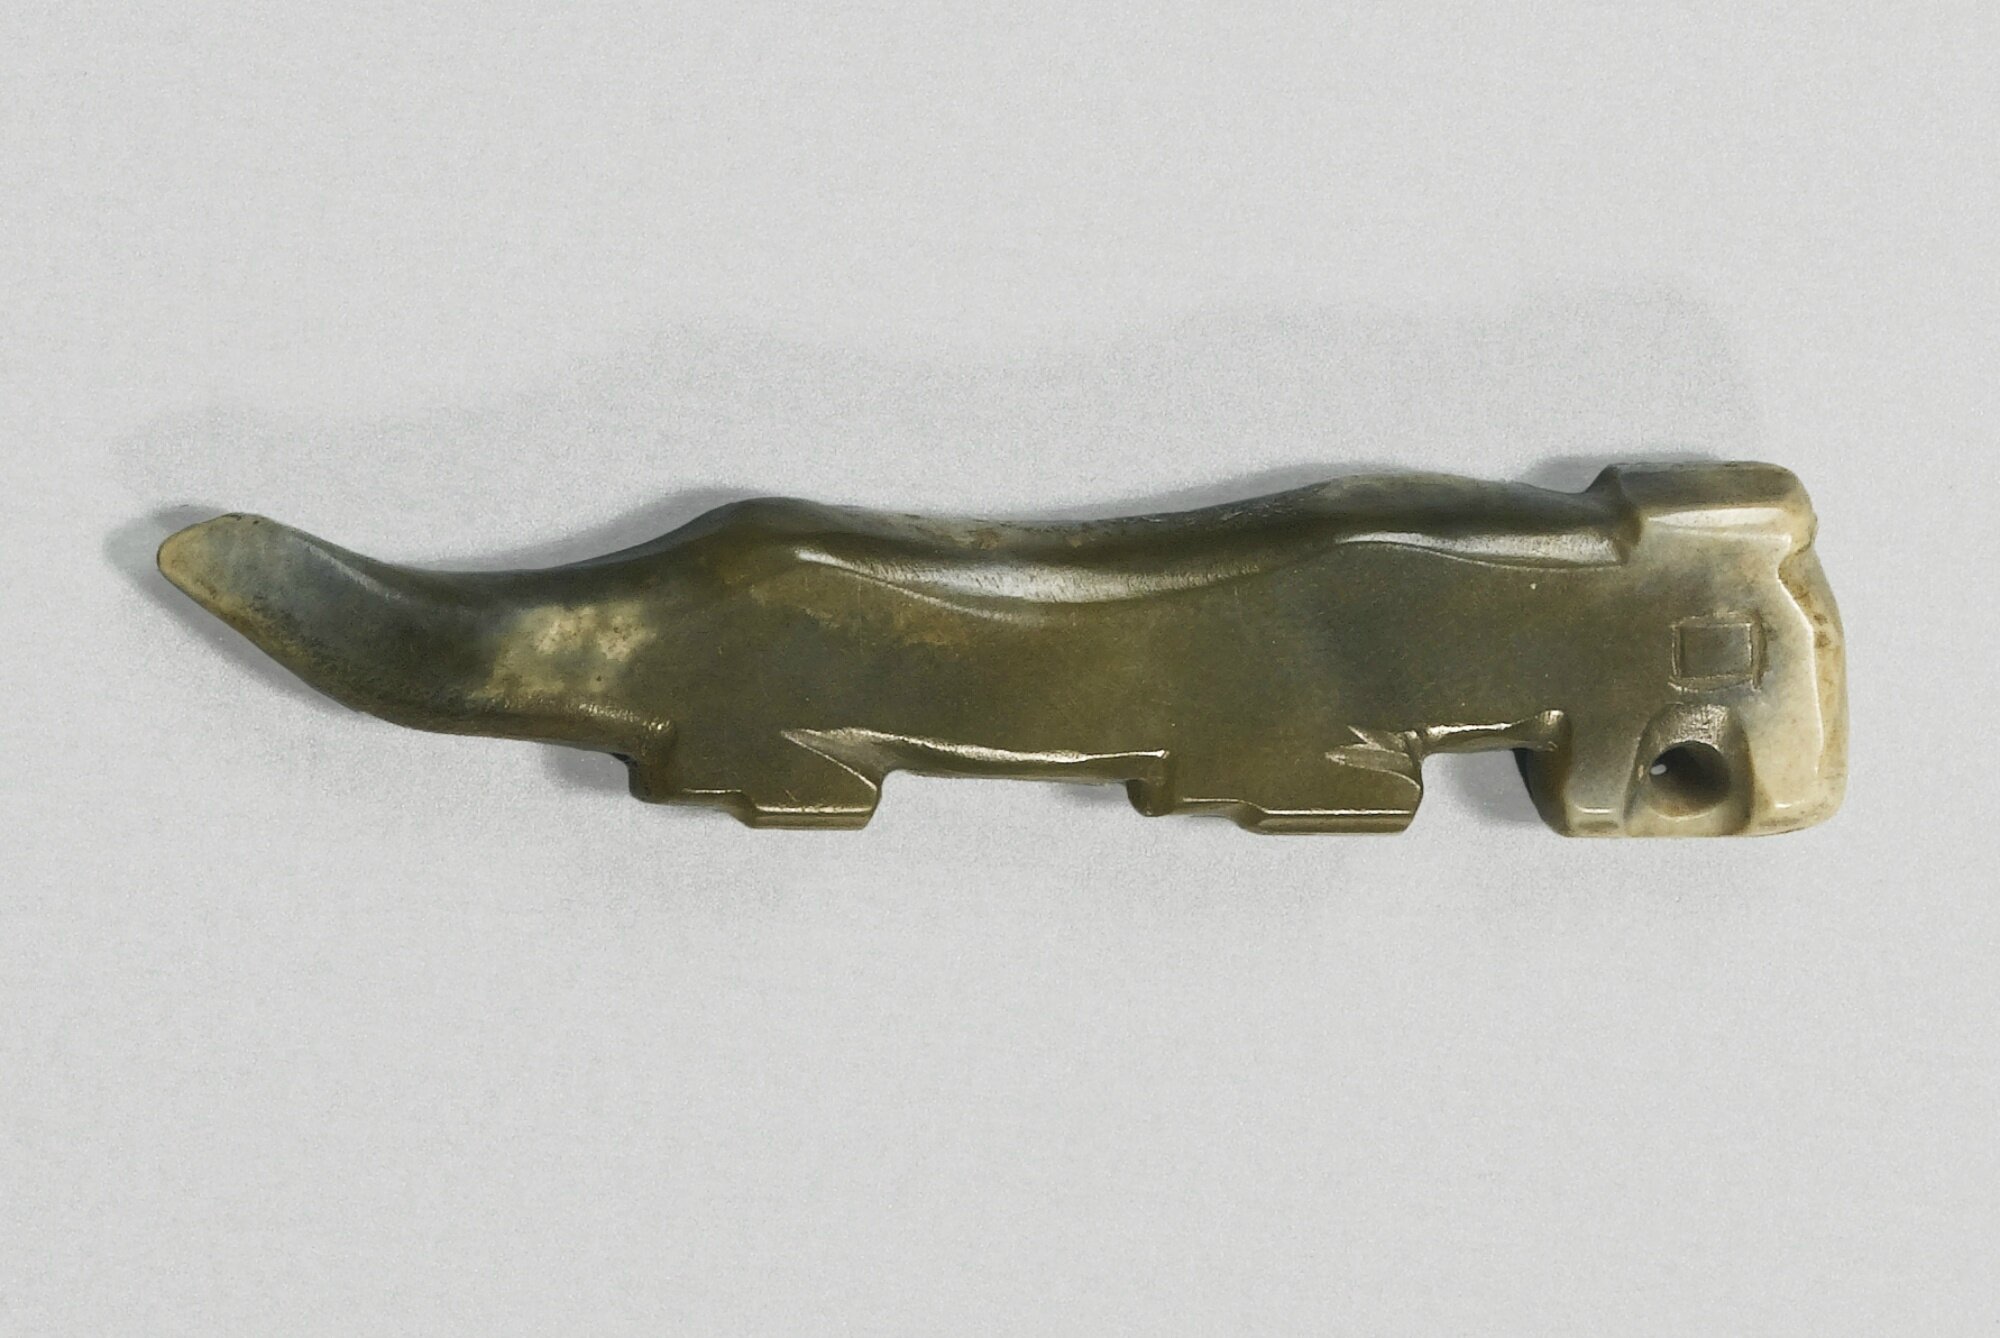 A jade tiger implrement, Shang dynasty (c